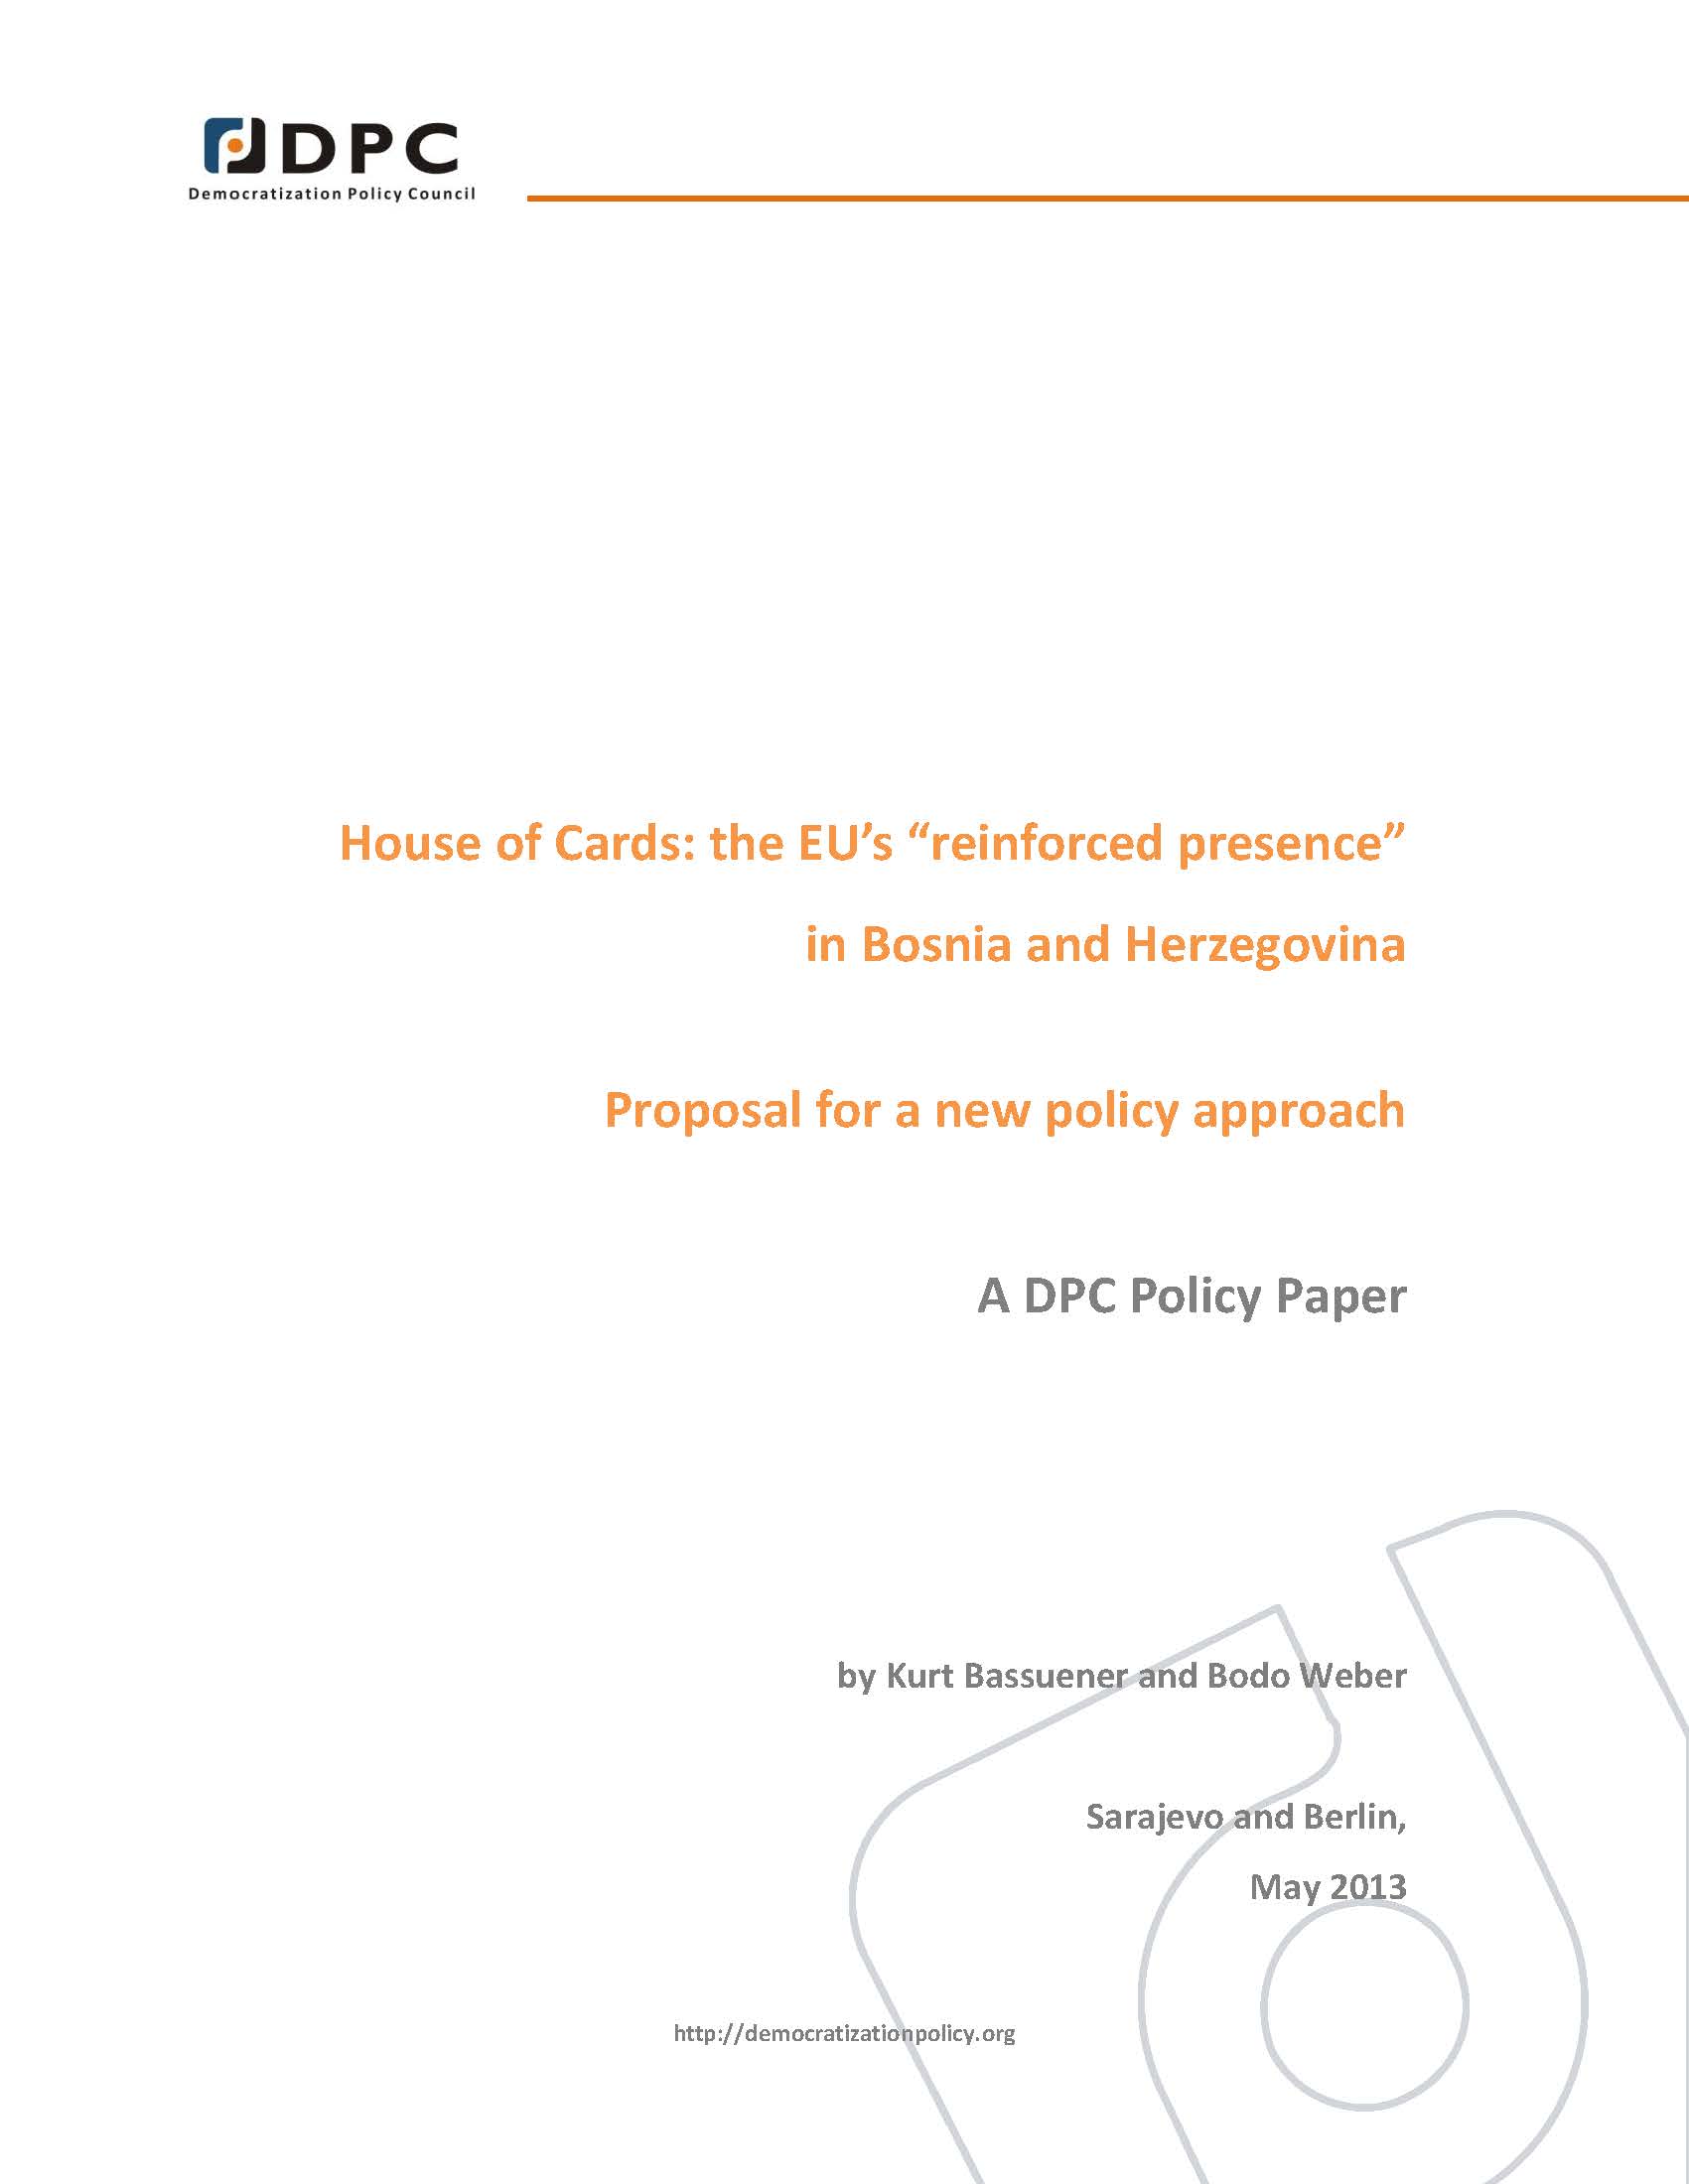 House of Cards: the EU’s “reinforced presence” in Bosnia and Herzegovina. Proposal for a new policy approach.